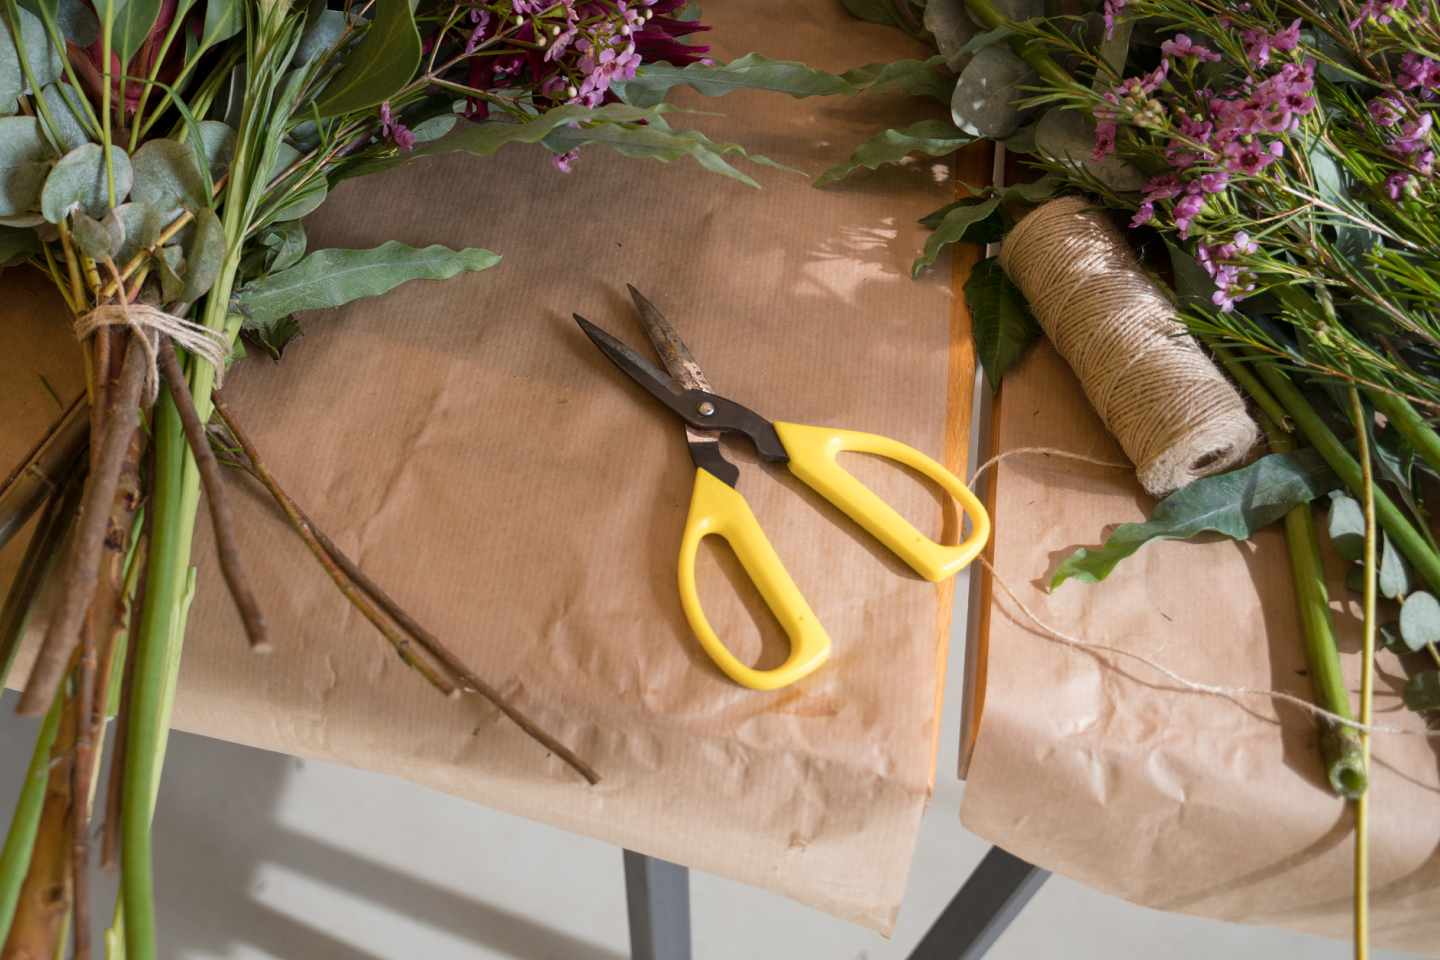 Tools of the trade: 7 essential farmer-florist tools to snip, chop